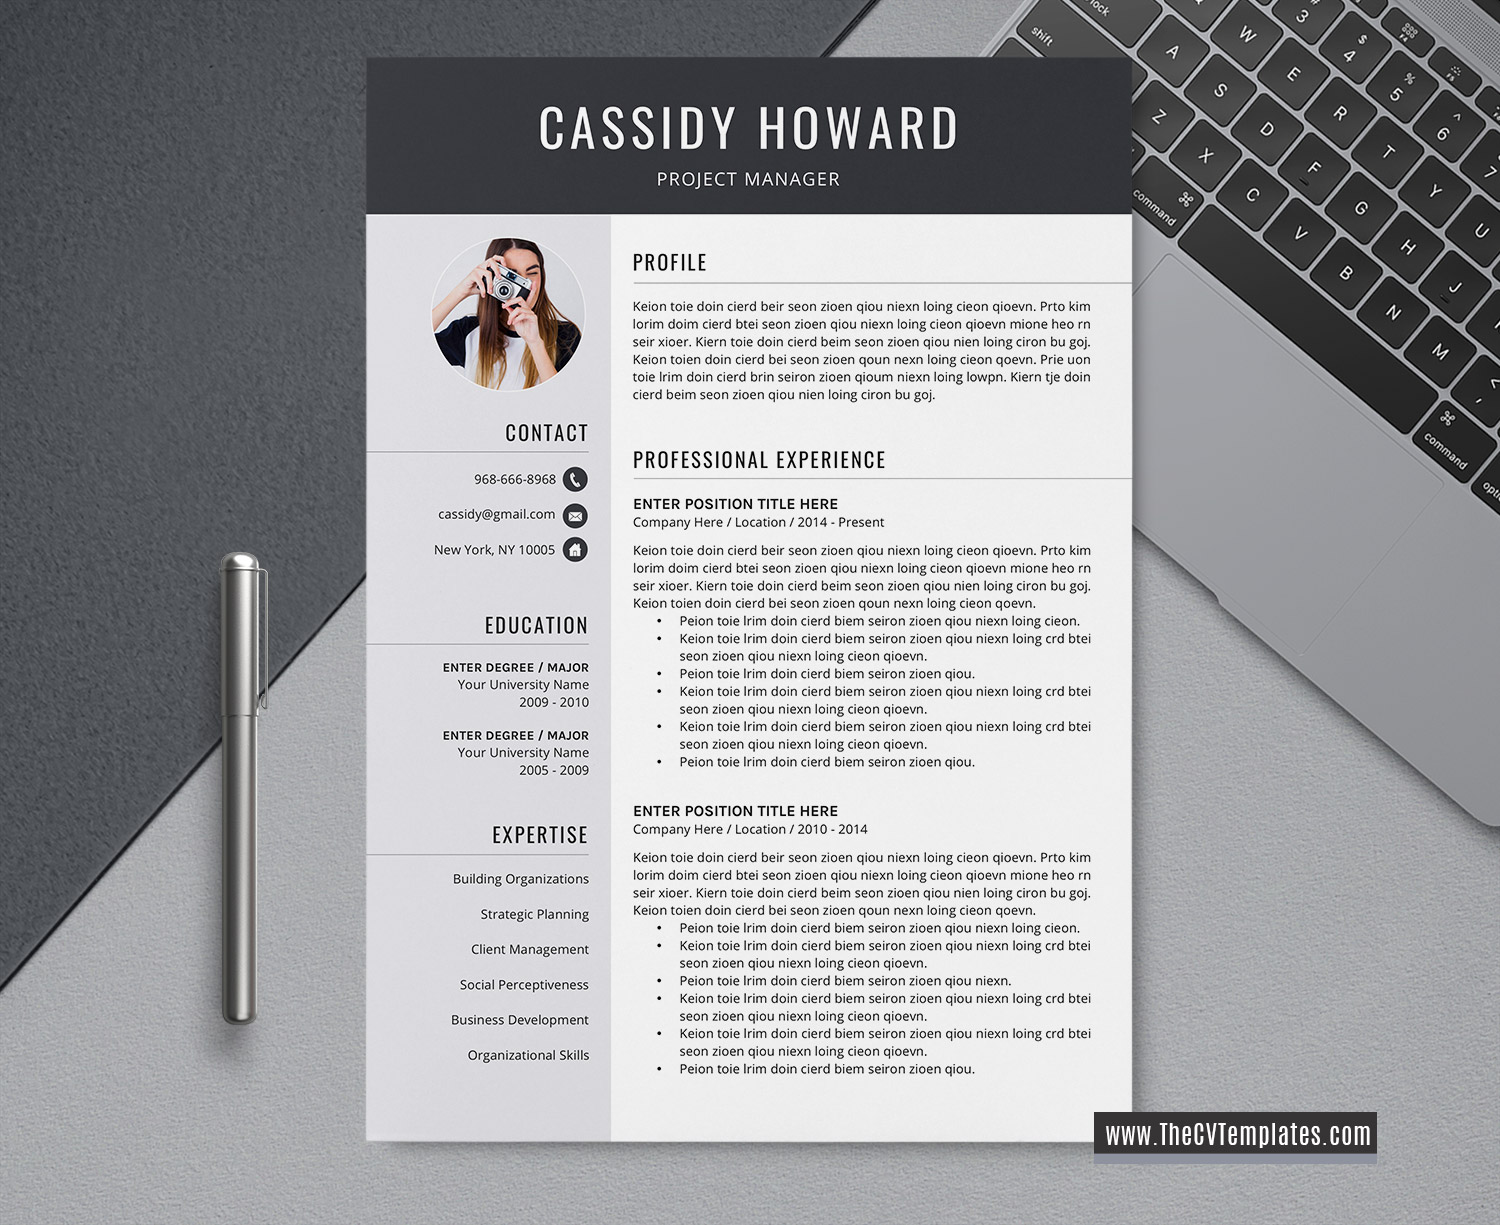 Basic Cv Layout from www.thecvtemplates.com